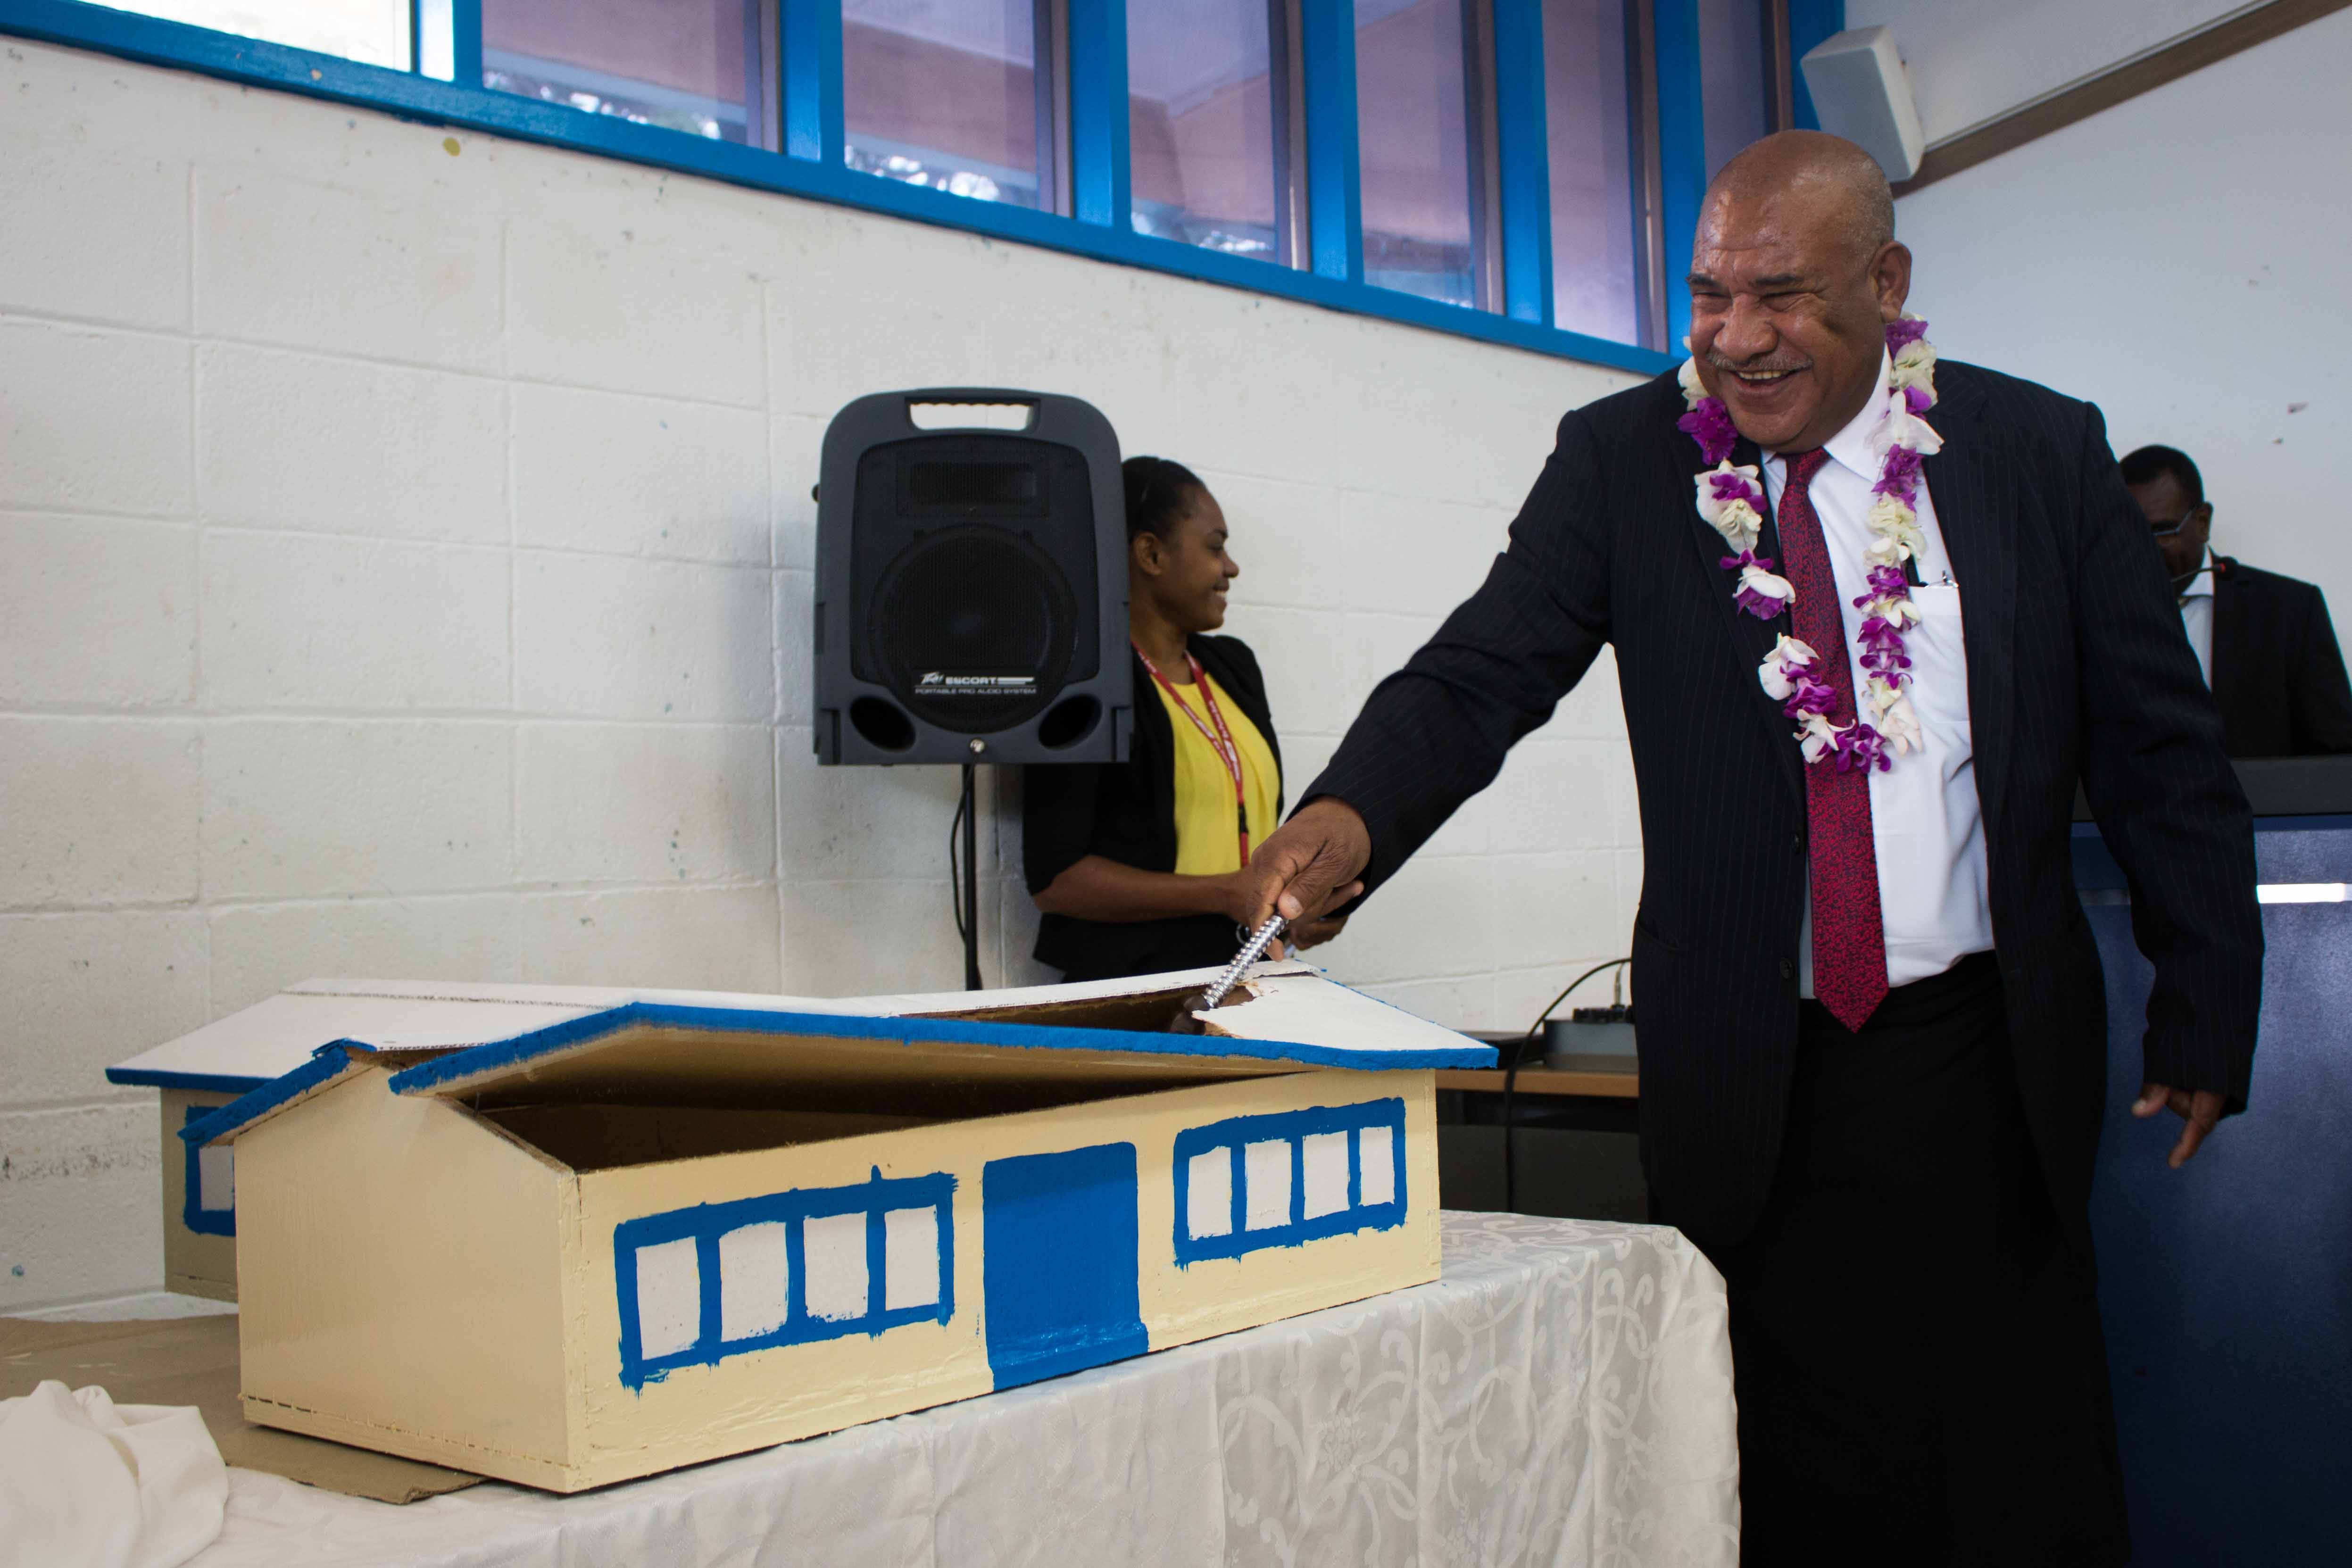 DPM Secretary Kali symbolically demolished a model of the old PNGIPA Library that is to be replaced